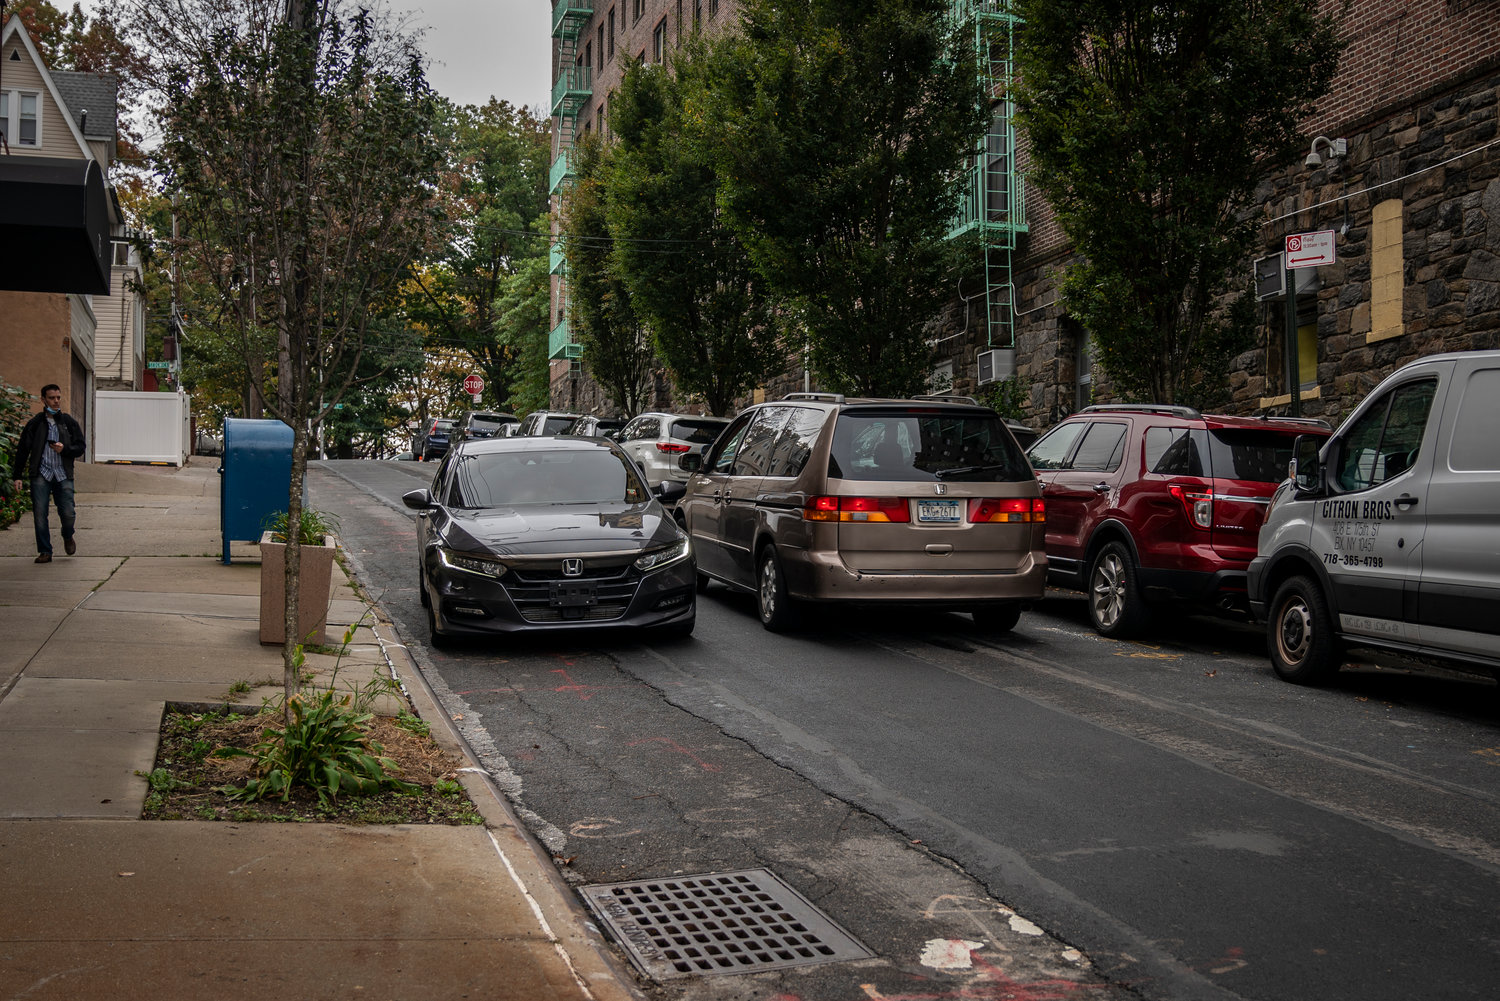 Narrow streets could be considered part of a neighborhood’s charm. But it also presents issues like traffic jams and potential for collisions, which is part of the reason why some want West 238th Street between Cannon Place and Sedgwick Avenue to become one-way.